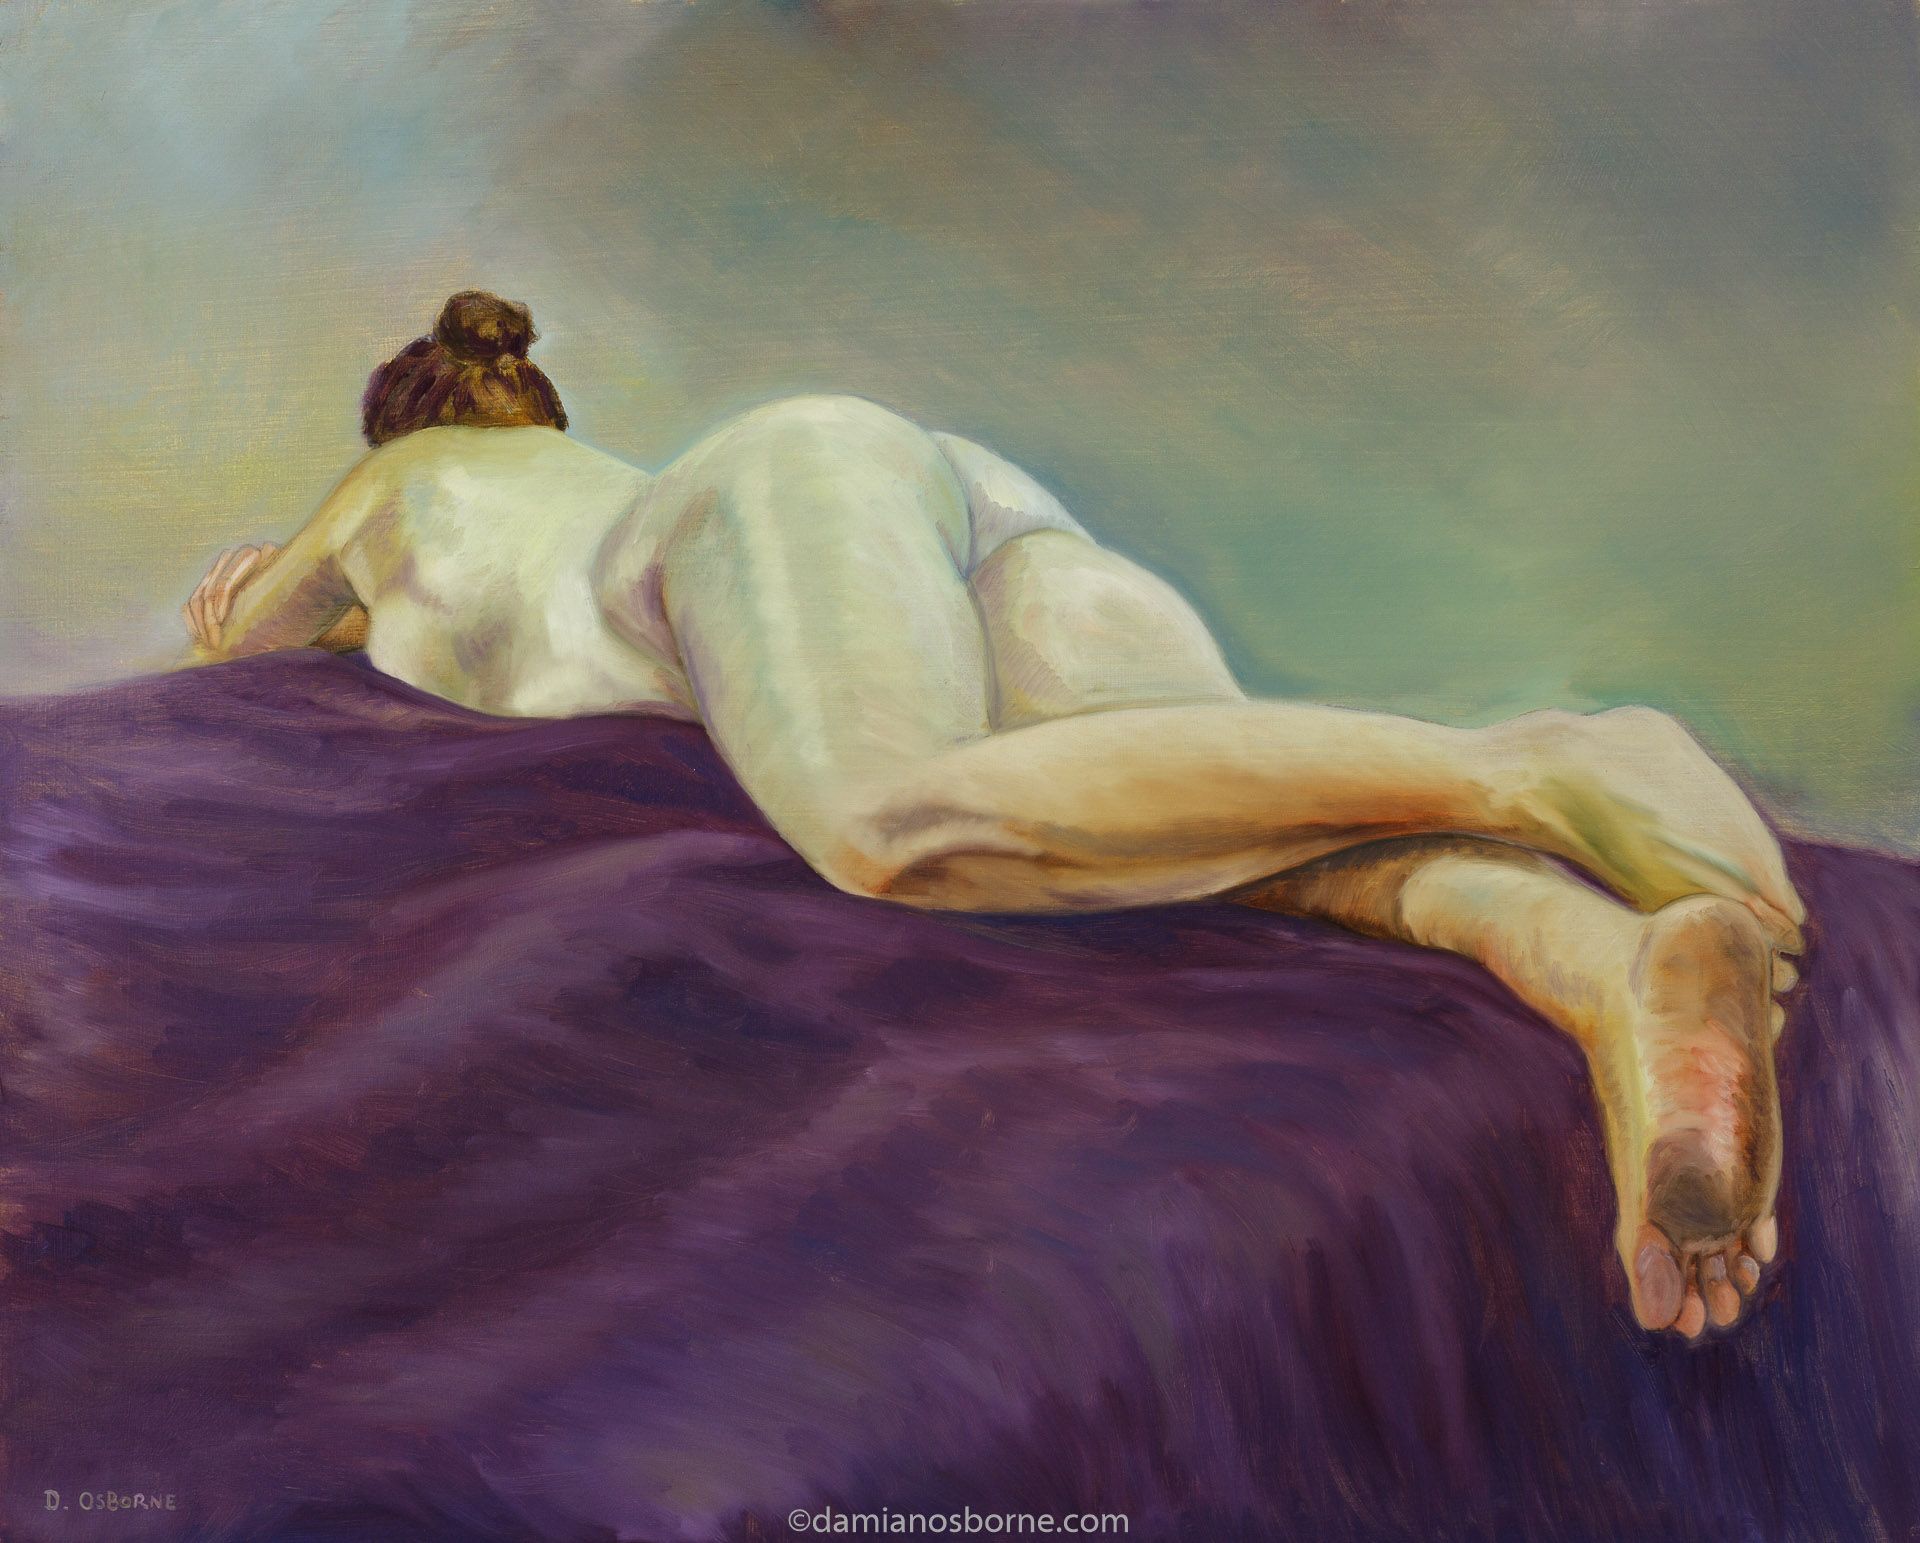 The Violet Bed, figurative oil painting by Damian Osborne, oil on board, 48 x 60 cm, 2017